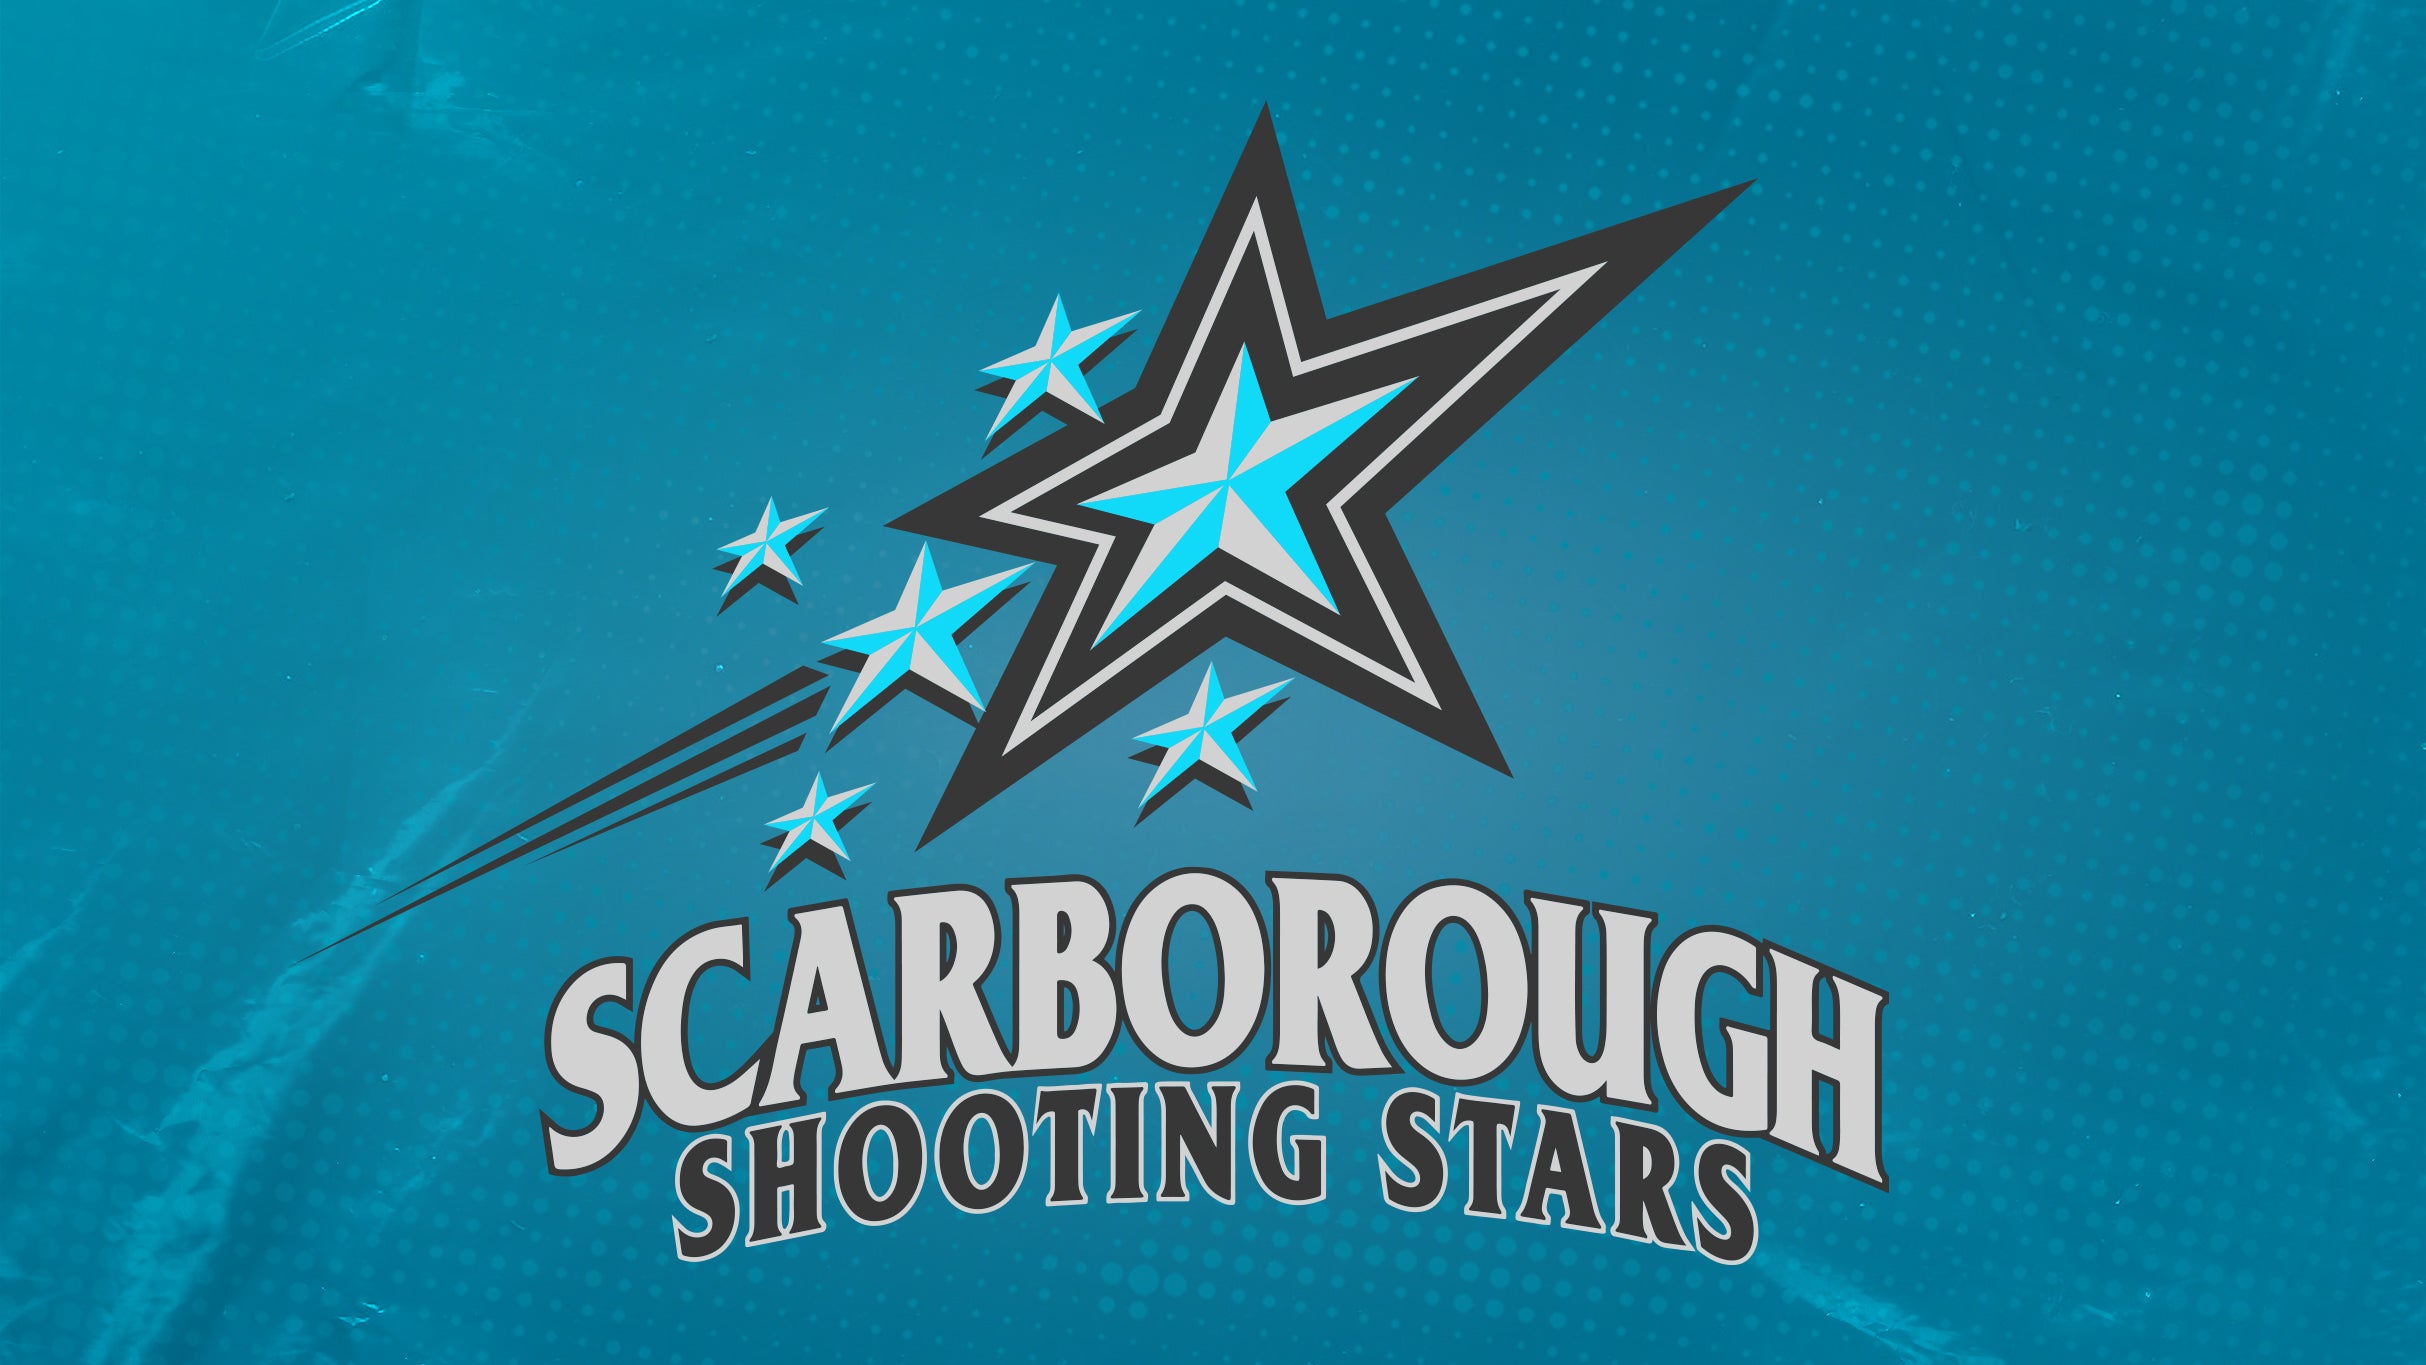 Scarborough Shooting Stars vs. Niagara River Lions in Toronto promo photo for Exclusive presale offer code